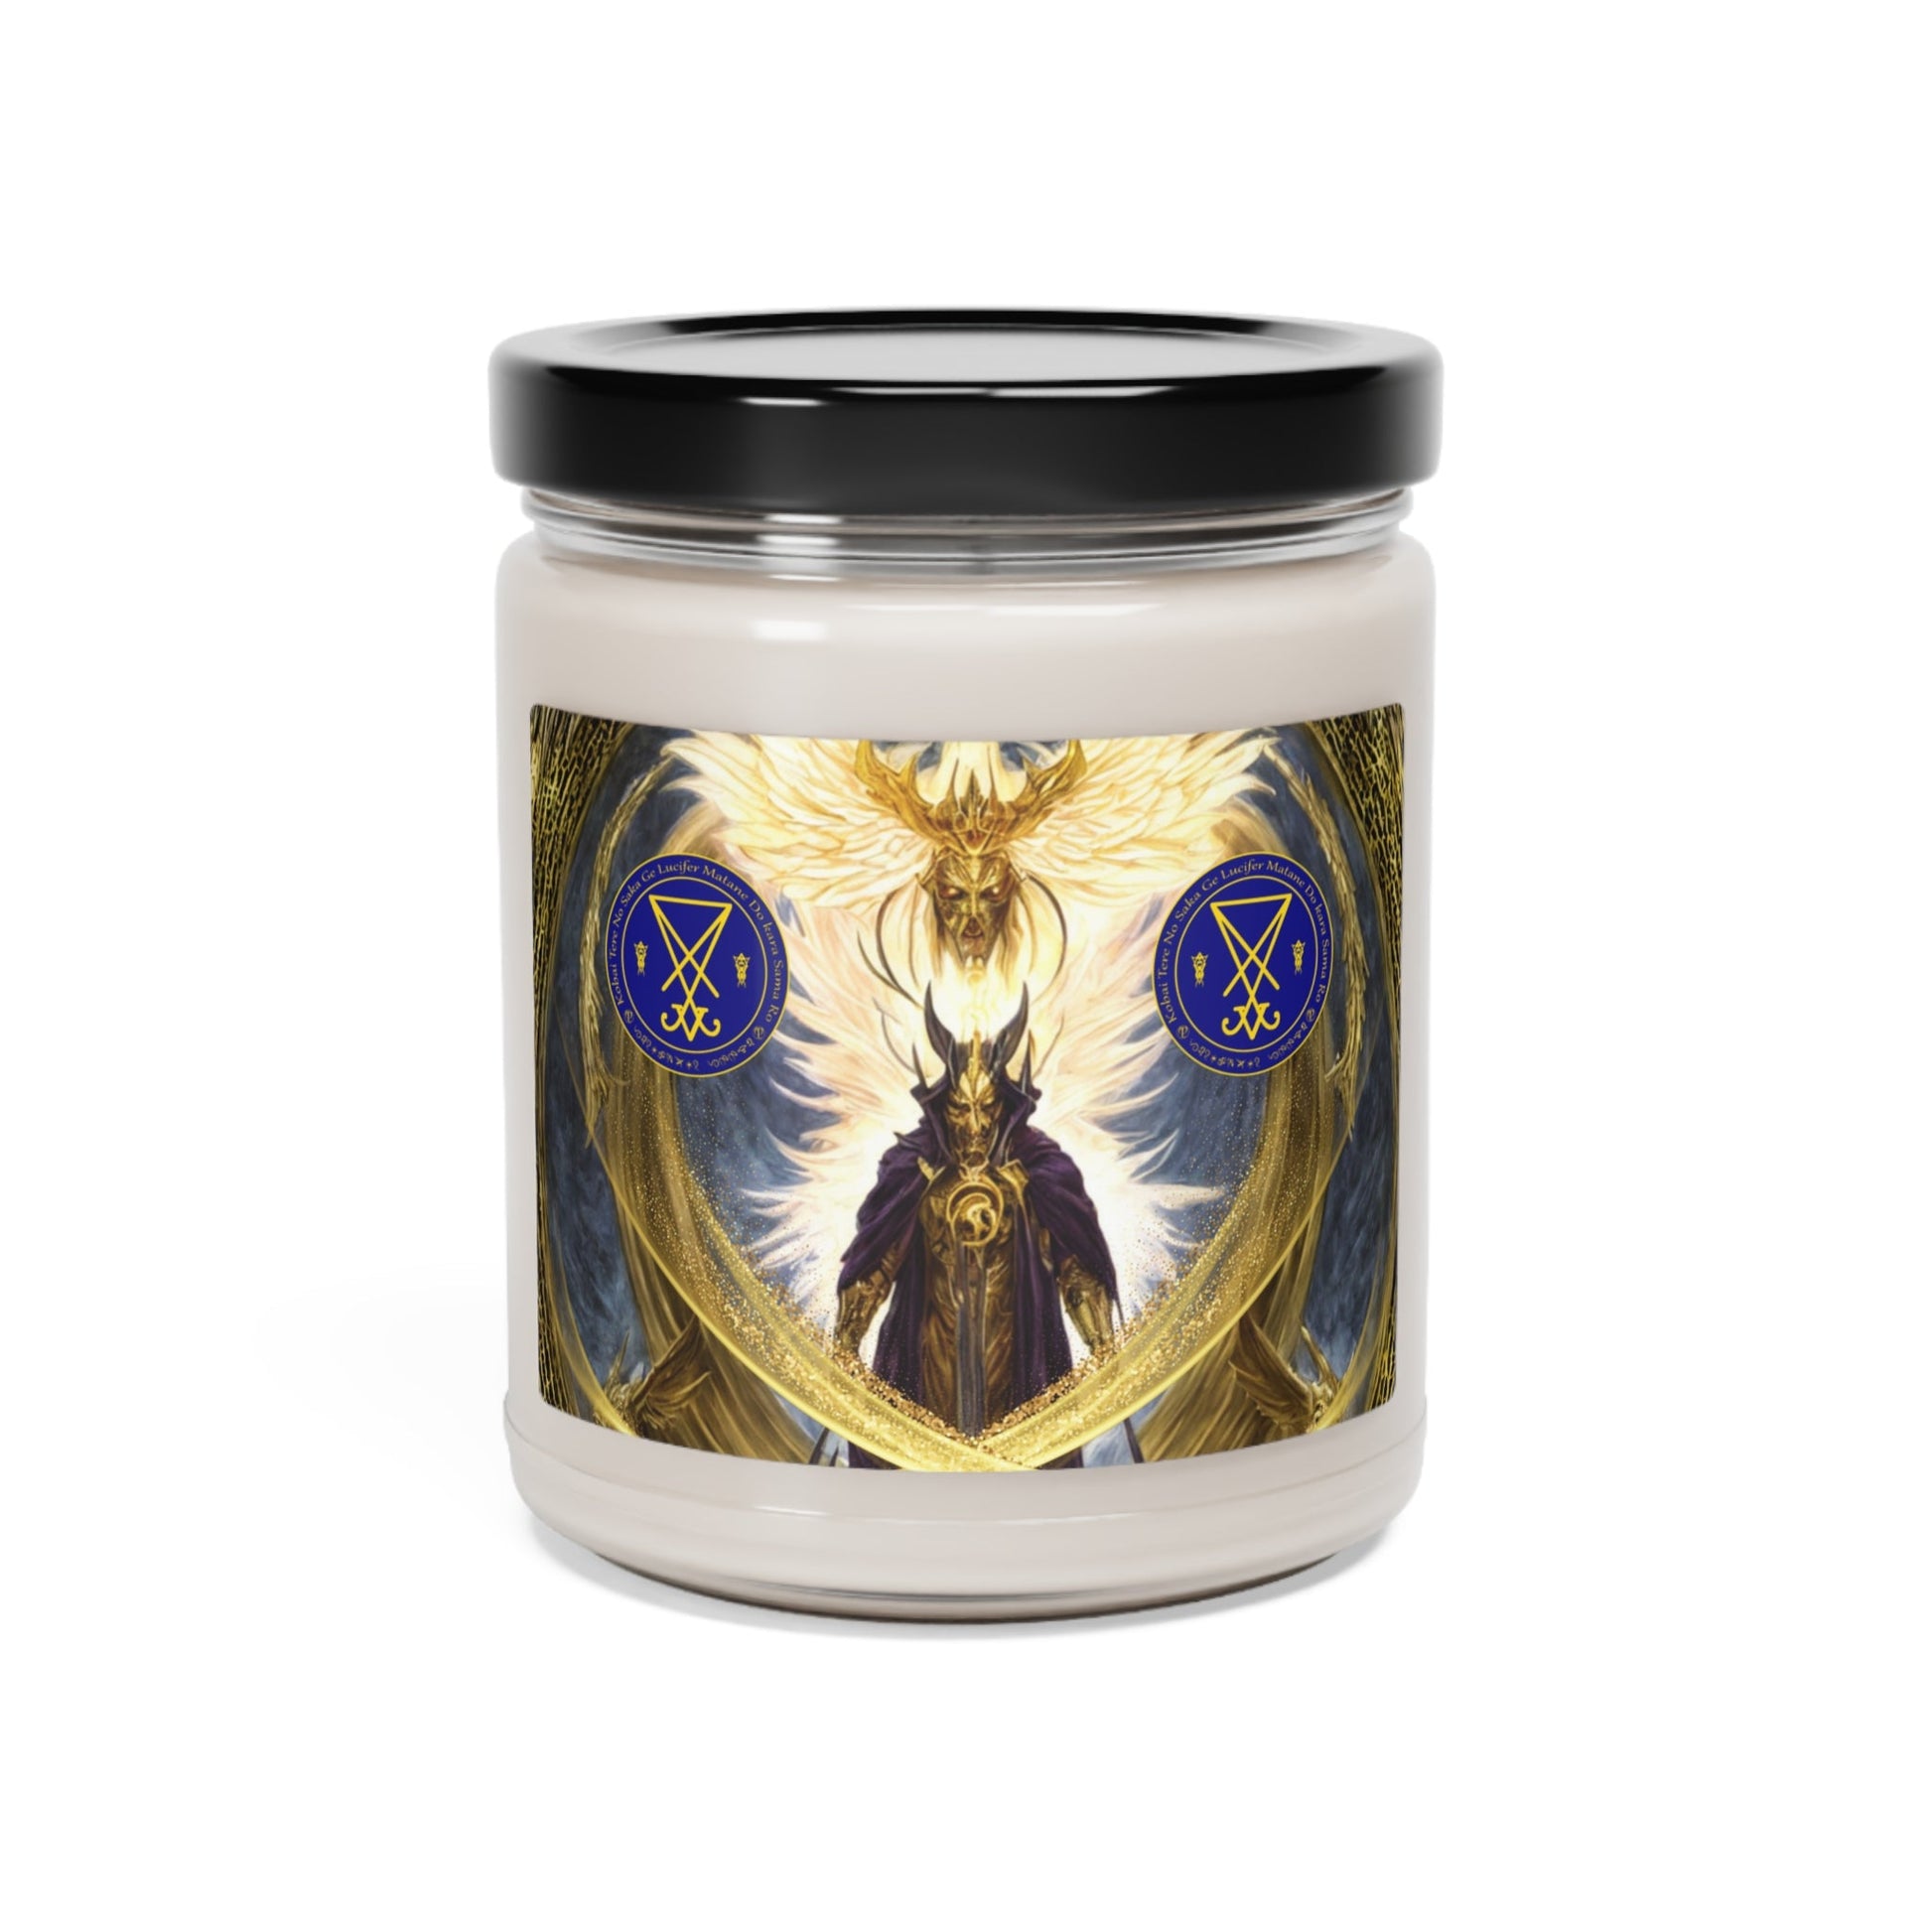 Demon-Lucifer-Scented-Soy-Candle-for-Altar-offerings-rituals-initiations-or-praying-and-meditation-16